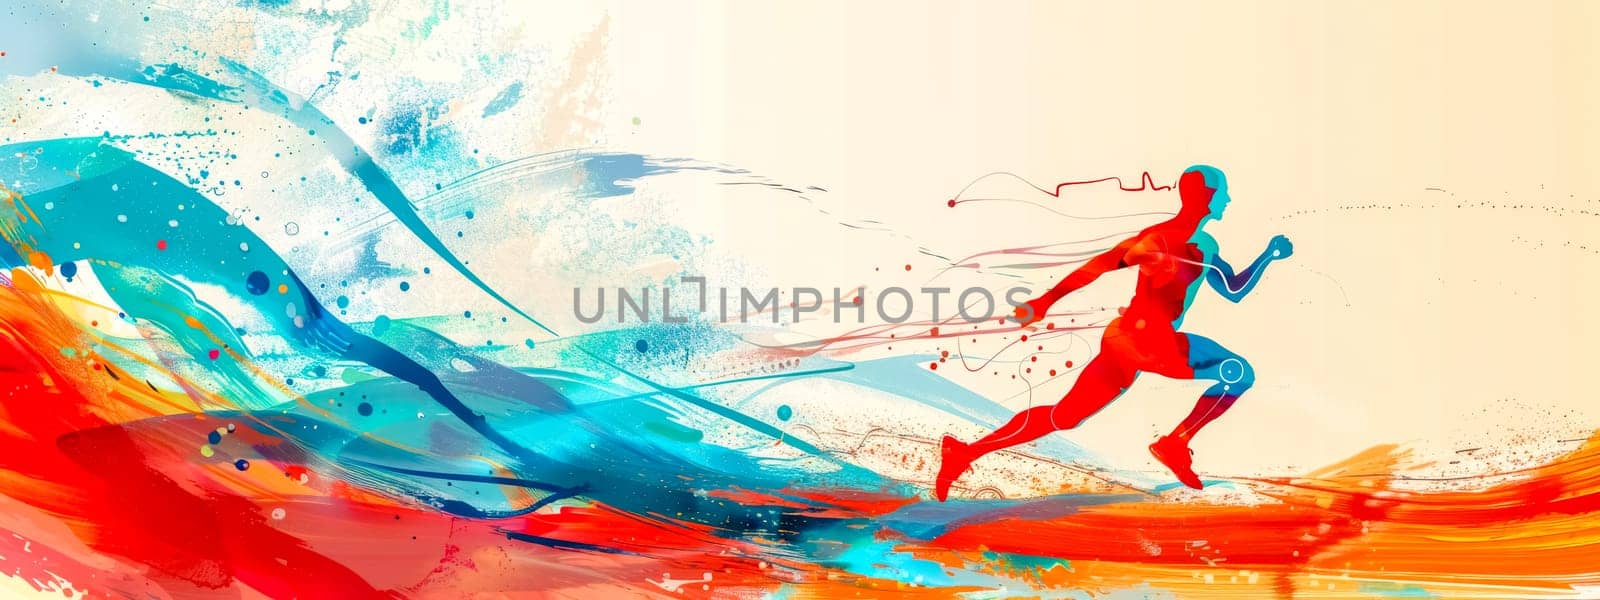 Vibrant abstract artwork featuring a silhouette of a runner with dynamic paint splashes